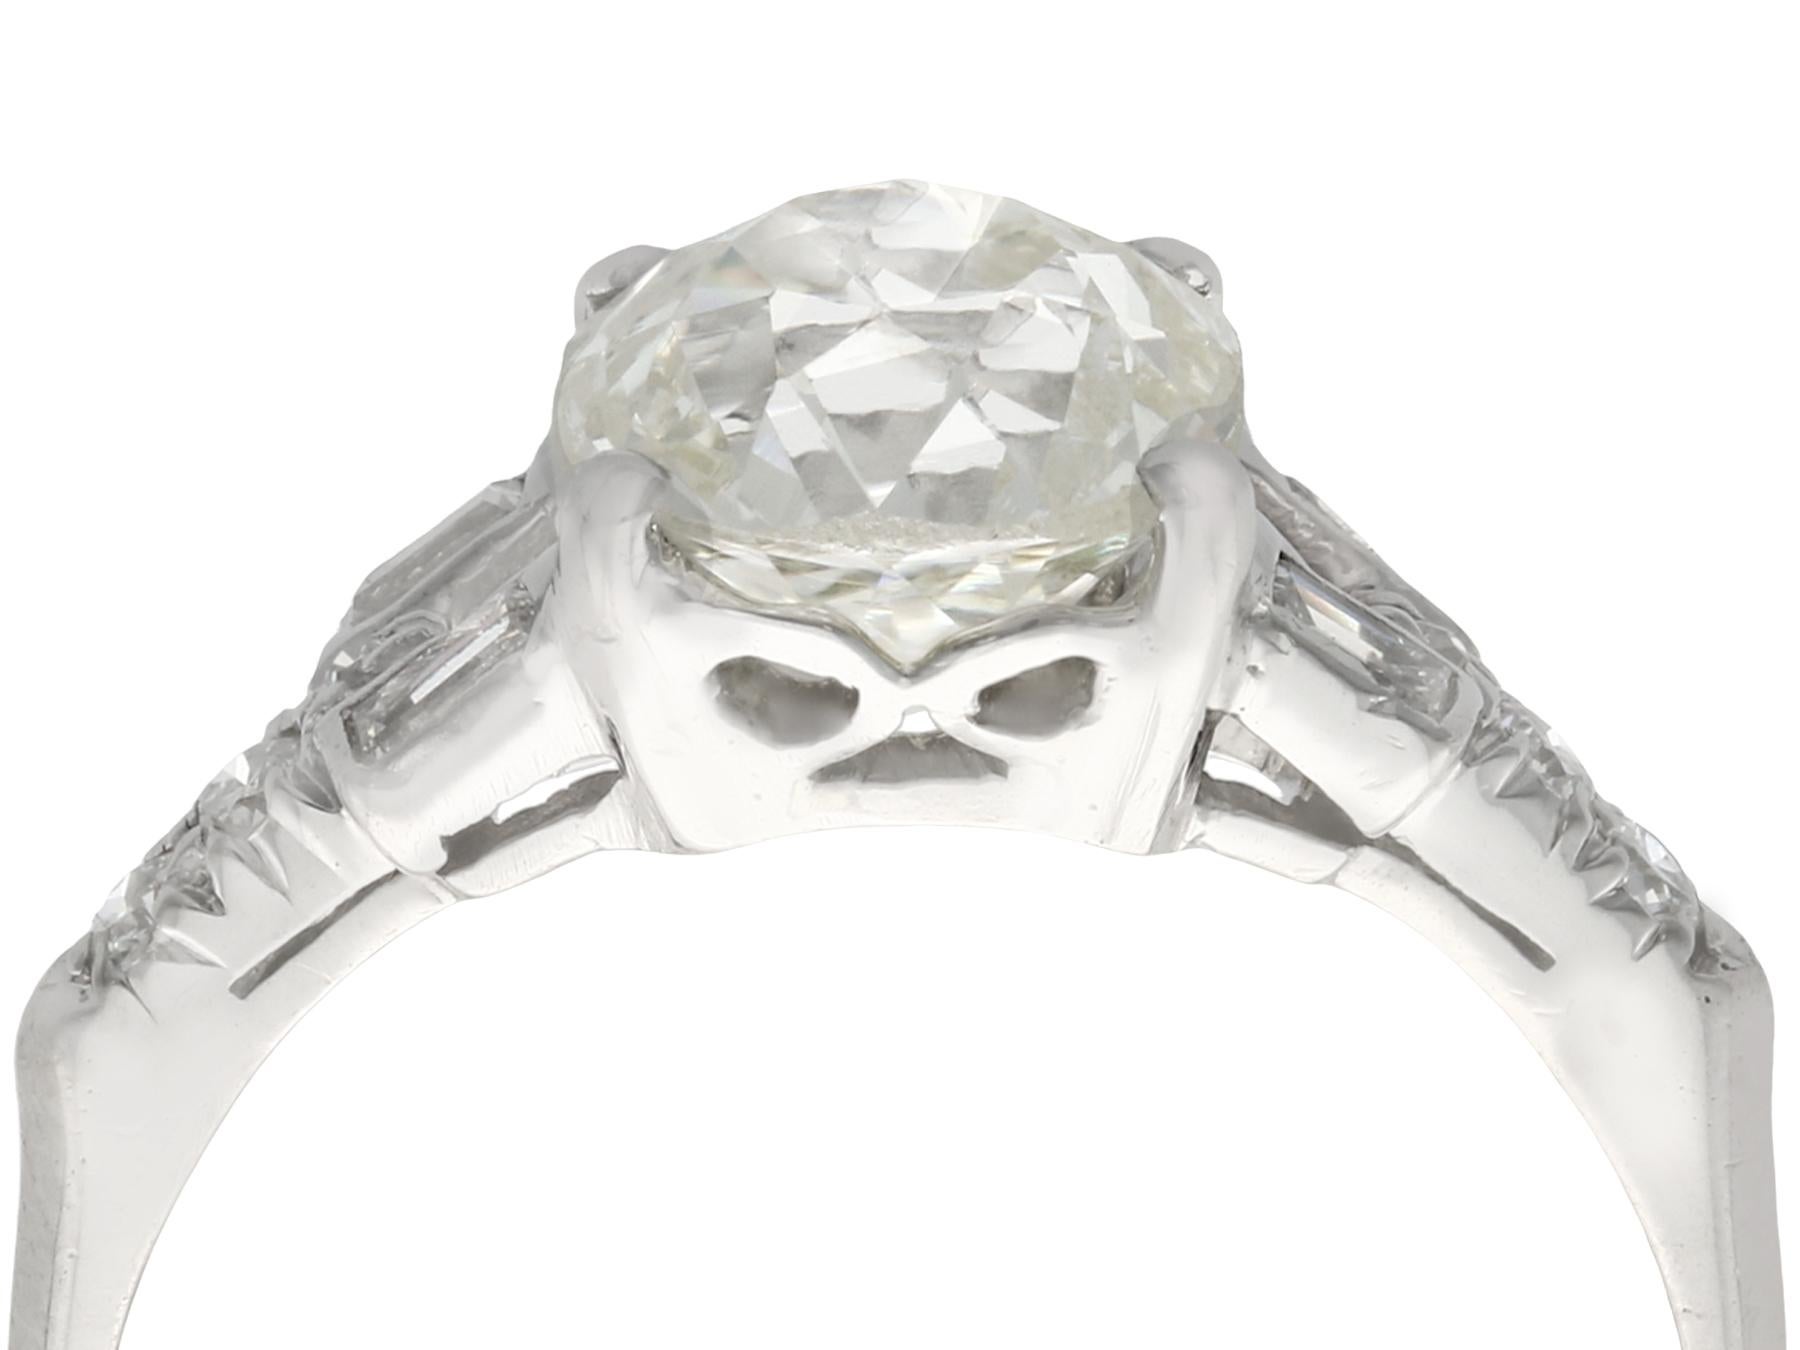 An impressive antique 1930's 2.21 carat diamond and platinum solitaire style engagement ring; part of our diverse antique estate jewelry collections.

This fine and impressive 1930's engagement ring has been crafted in platinum.

The pierced